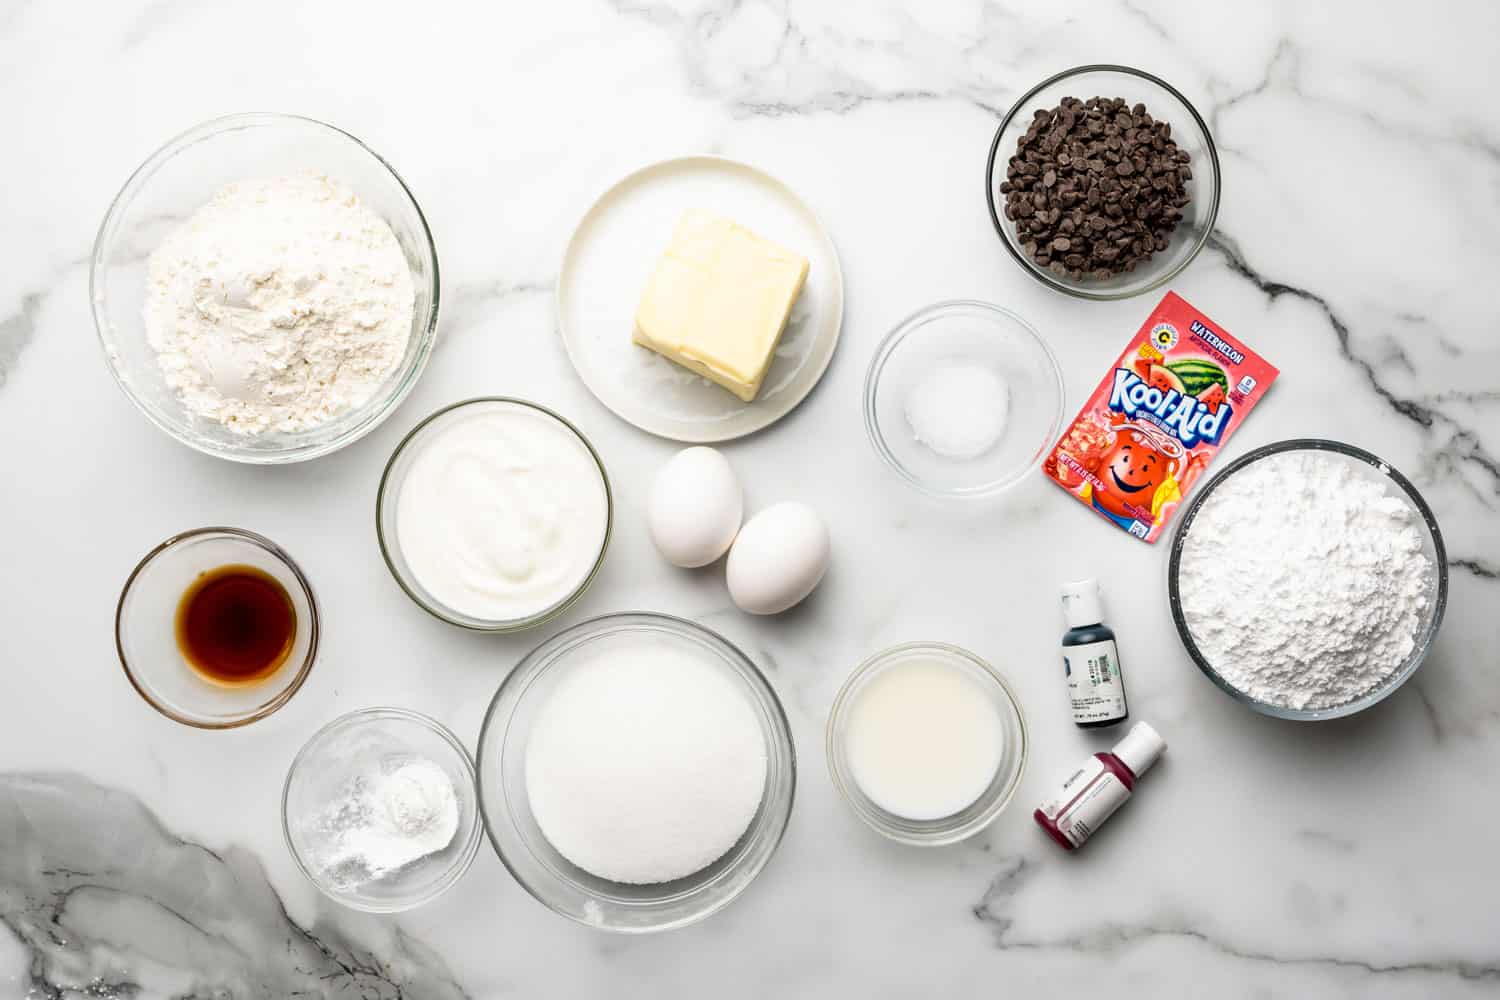 The ingredients needed to make watermelon cupcakes with kool aid buttercream, all measured into small bowls, on a marble counter and viewed from above.